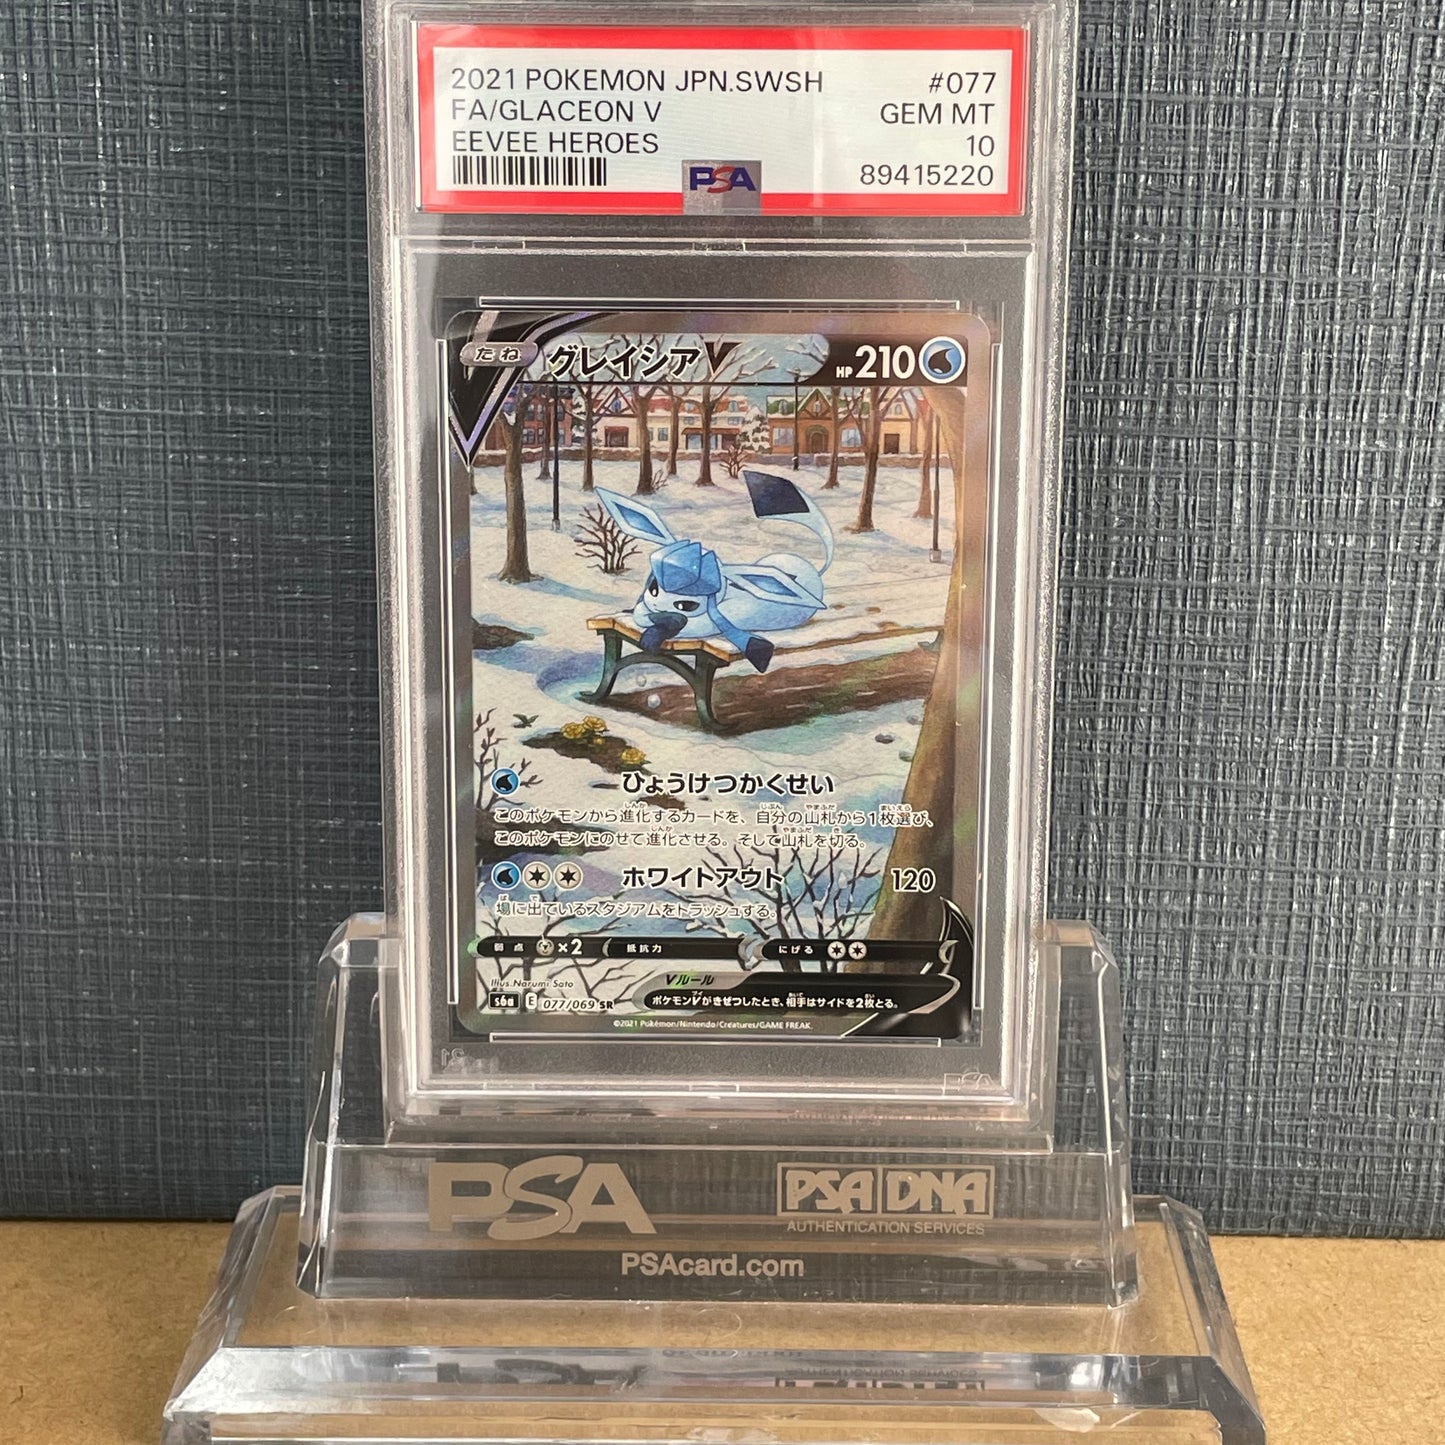 PSA10 GLACEON V EEVEE HEROESE POKEMON CARD 2021 077/069